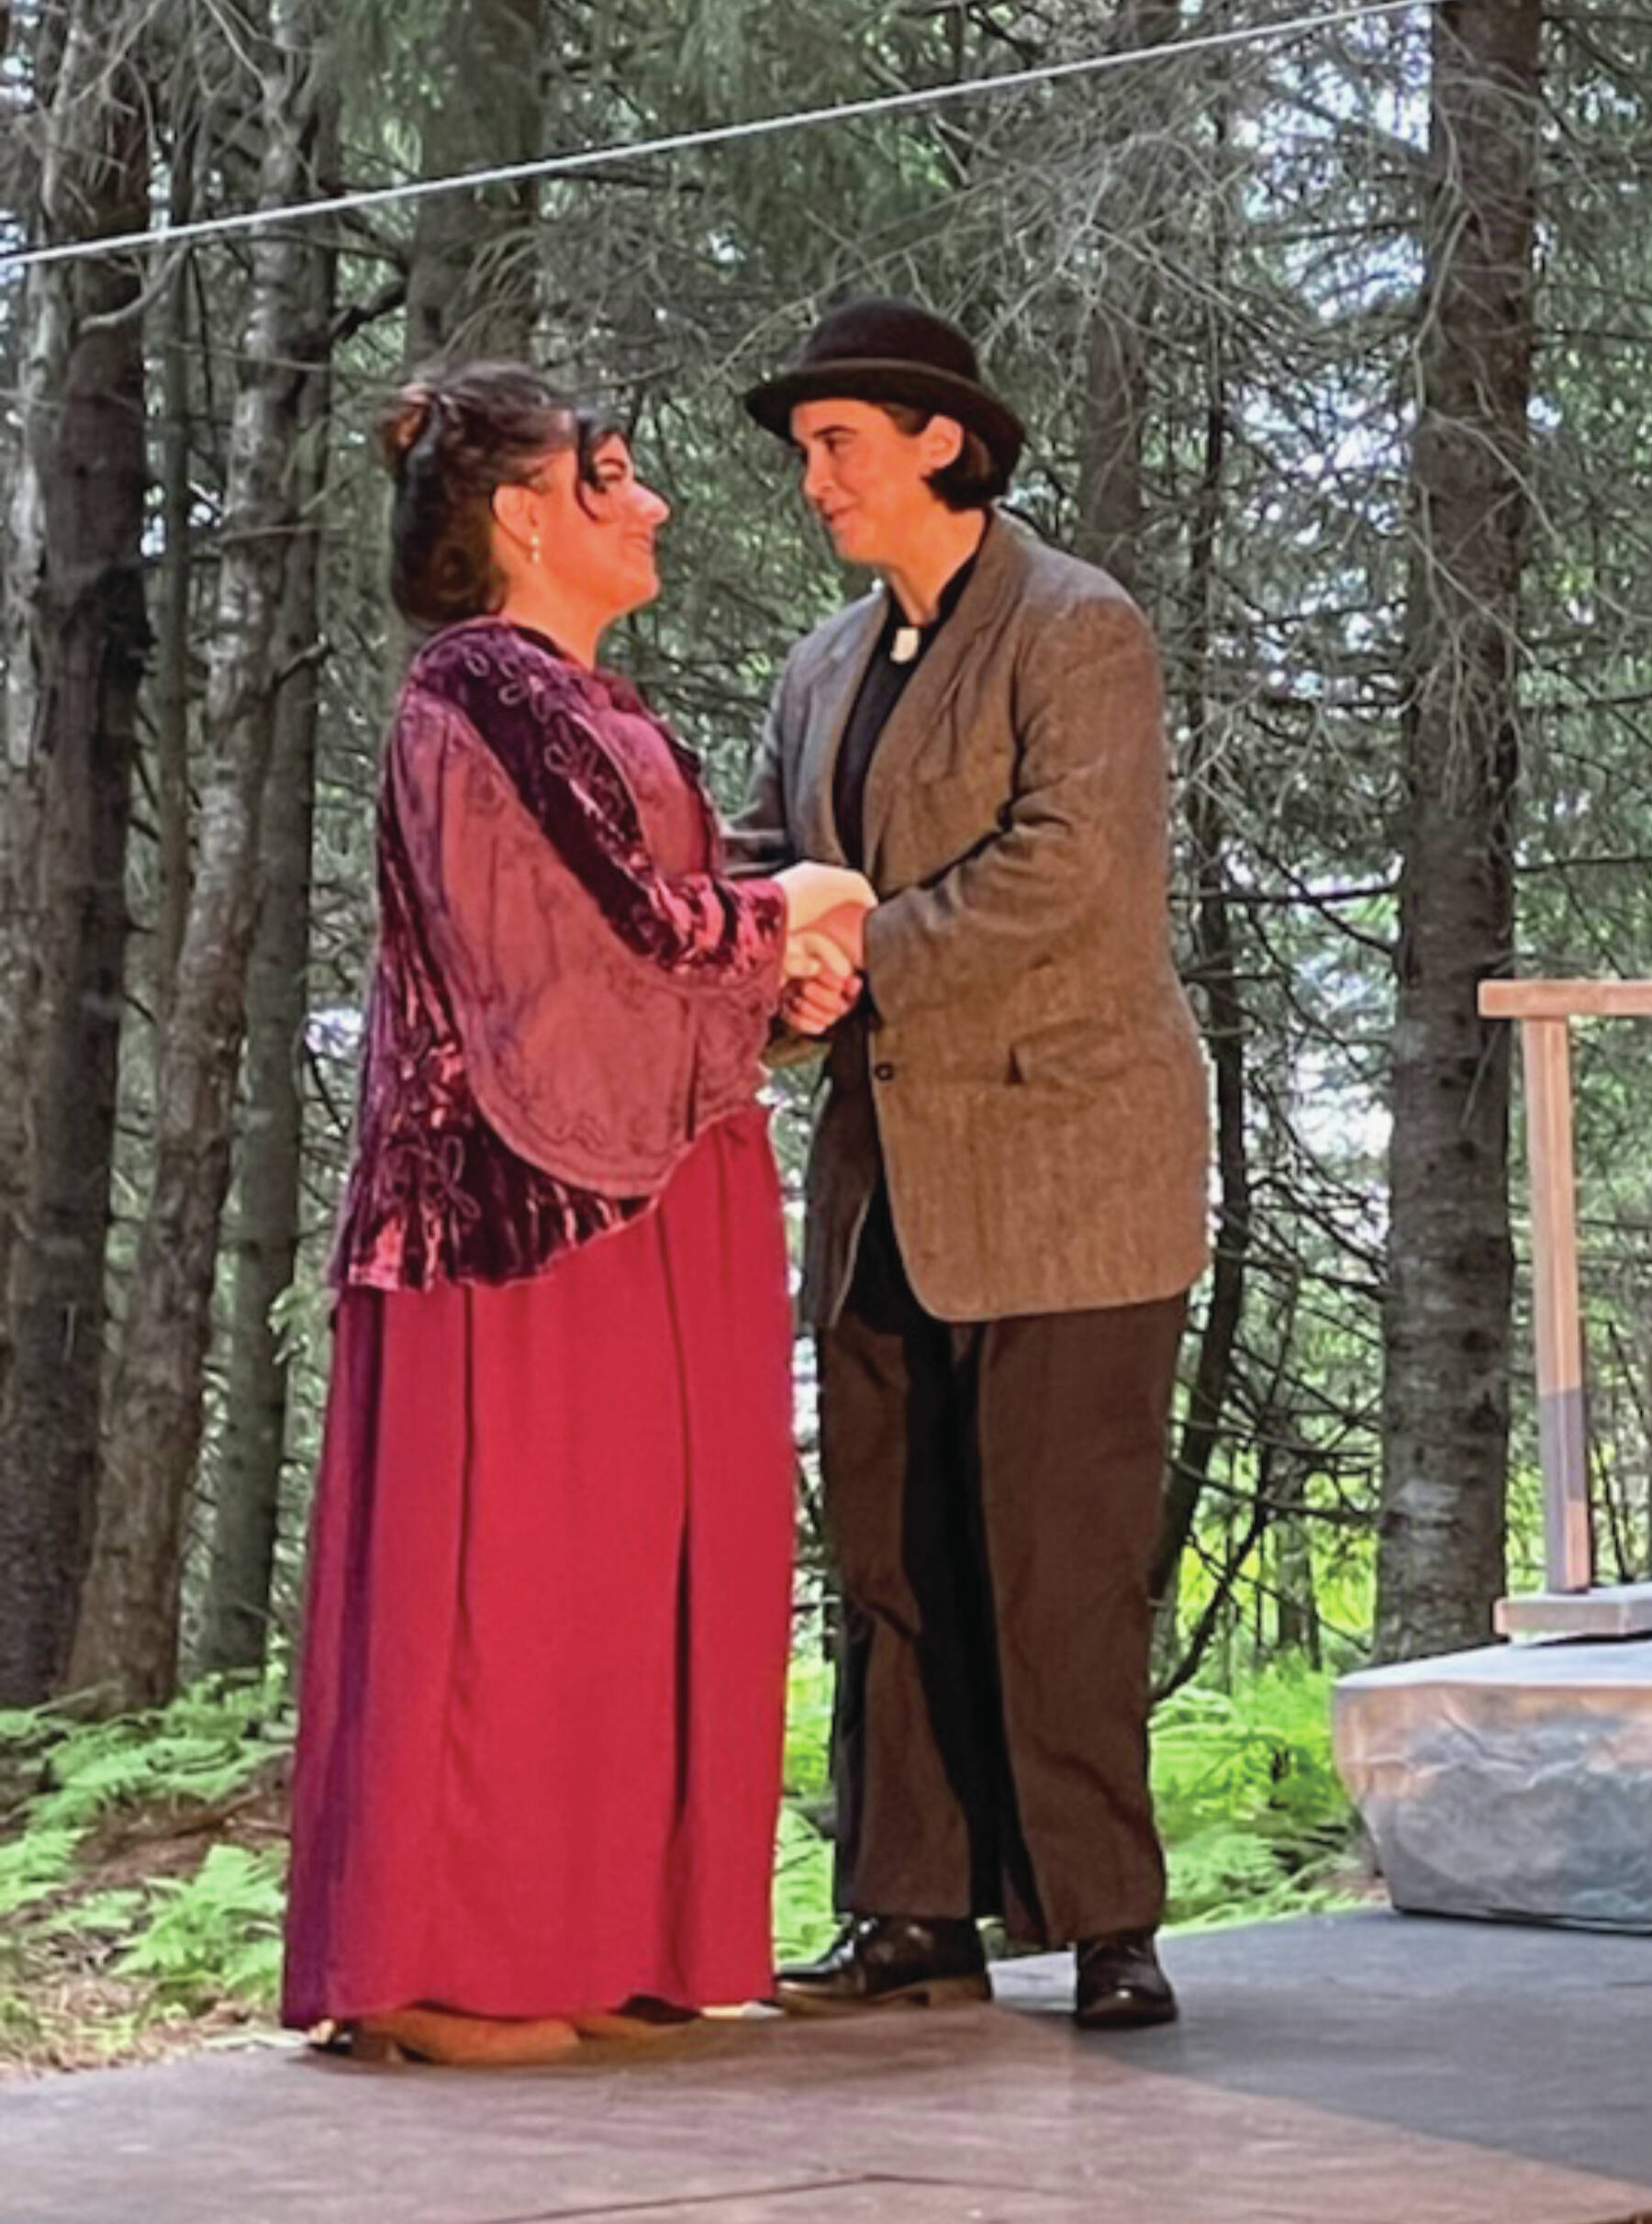 Photos by Emilie Springer/ Homer News
Cristen San Roman and Regi Johanos perform in “Maud of the Island” on the Pratt Museum’s forest stage in Homer on June 29.